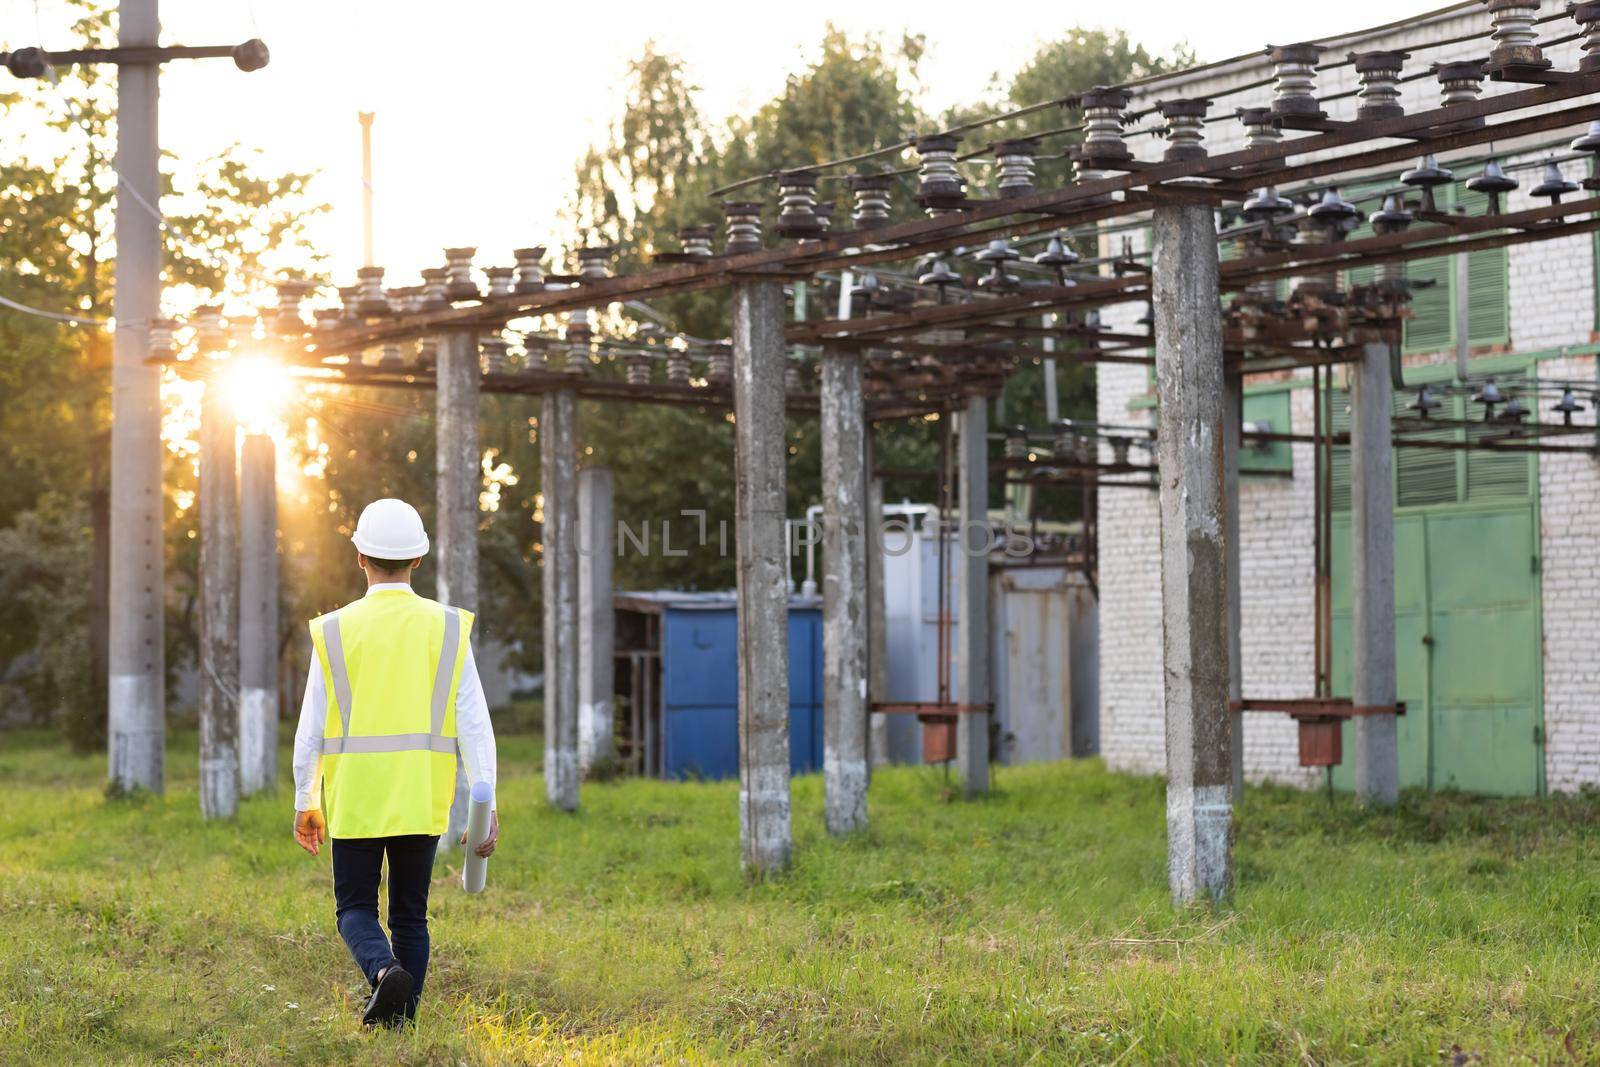 Electrical engineer wearing a helmet and safety vest walking near high voltage electrical lines towards power station during sunset. Concept of electric power station development.